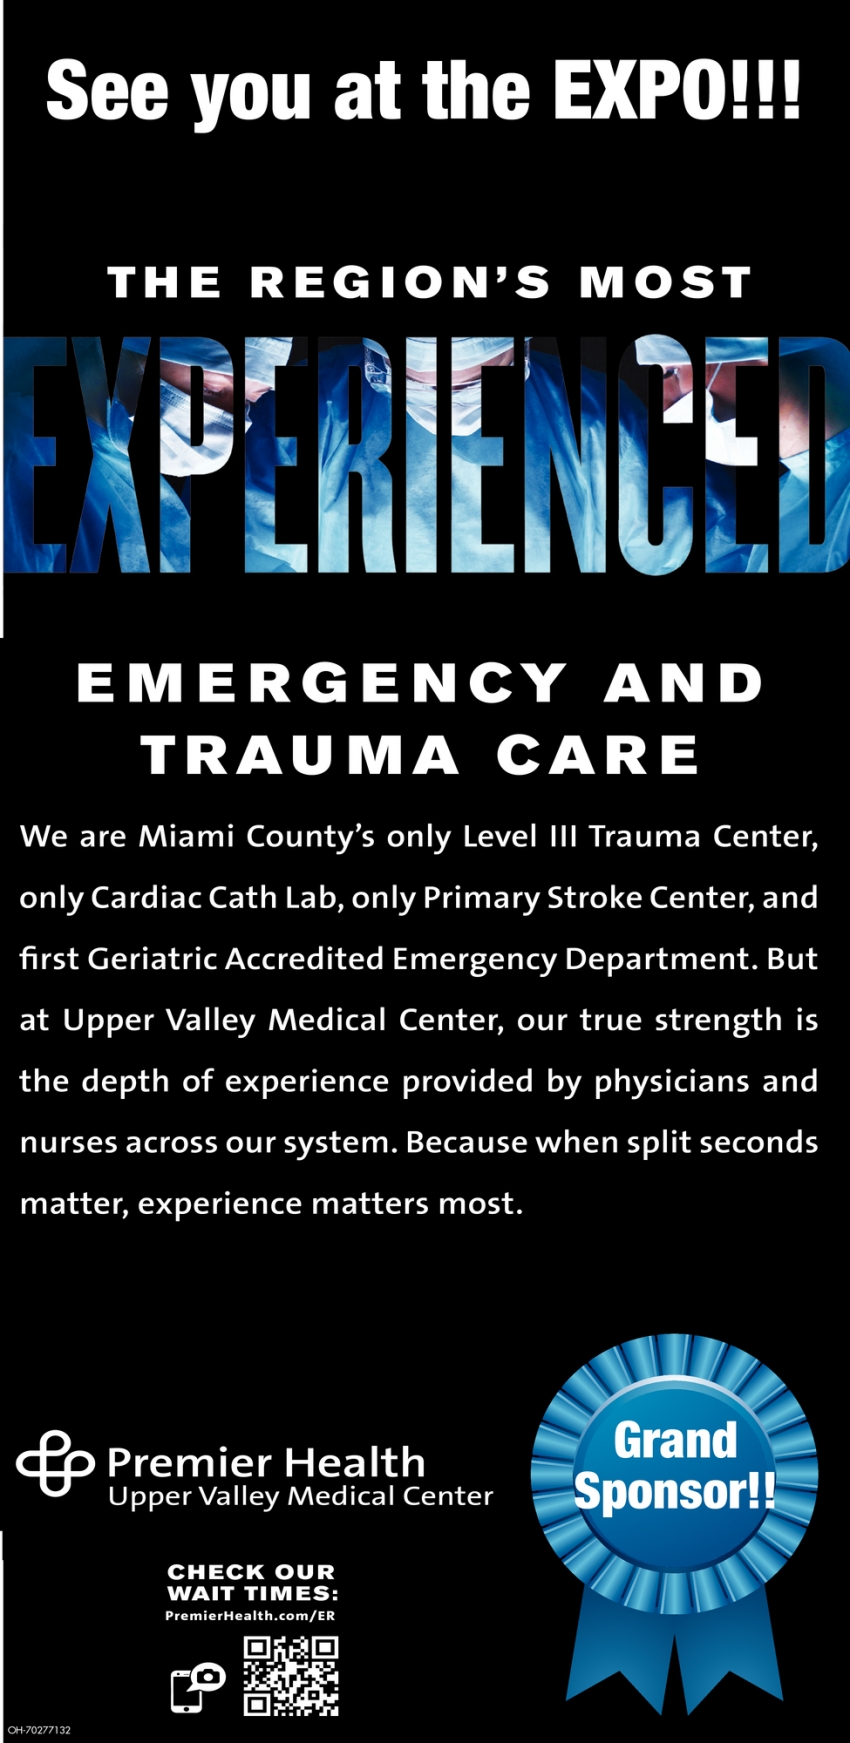 The Region's Most Experienced Emergency And Trauma Care